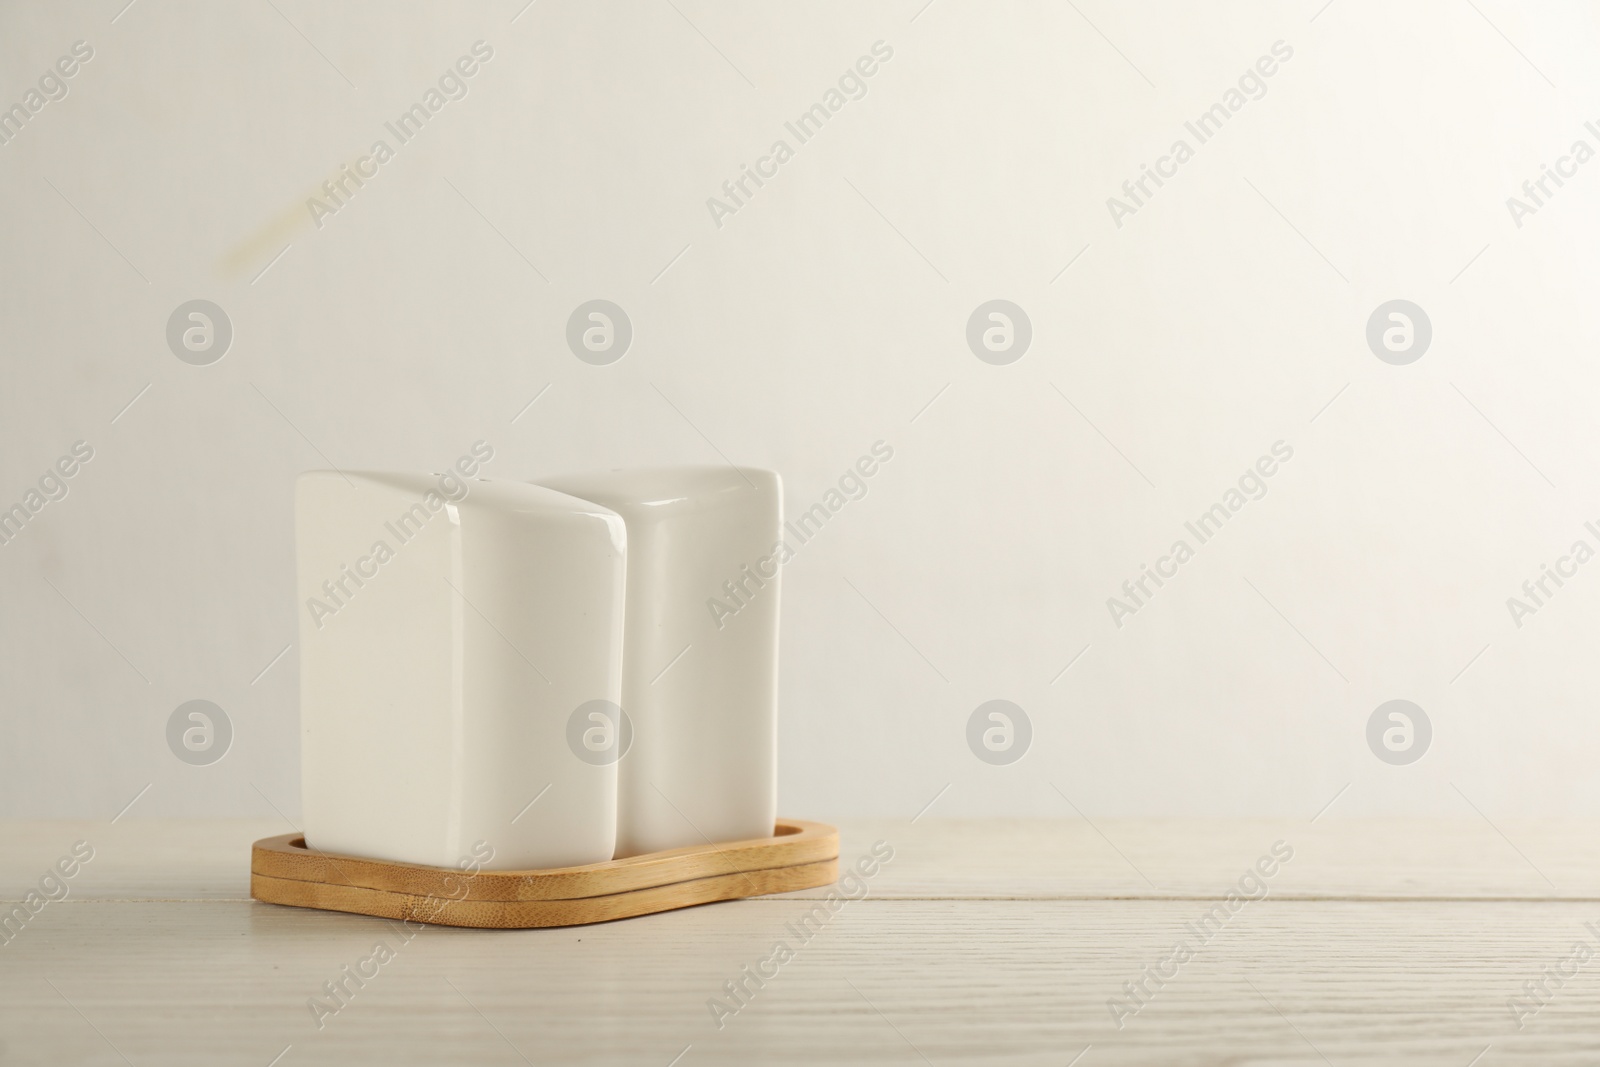 Photo of Ceramic salt and pepper shakers with stand on wooden table against white background. Space for text